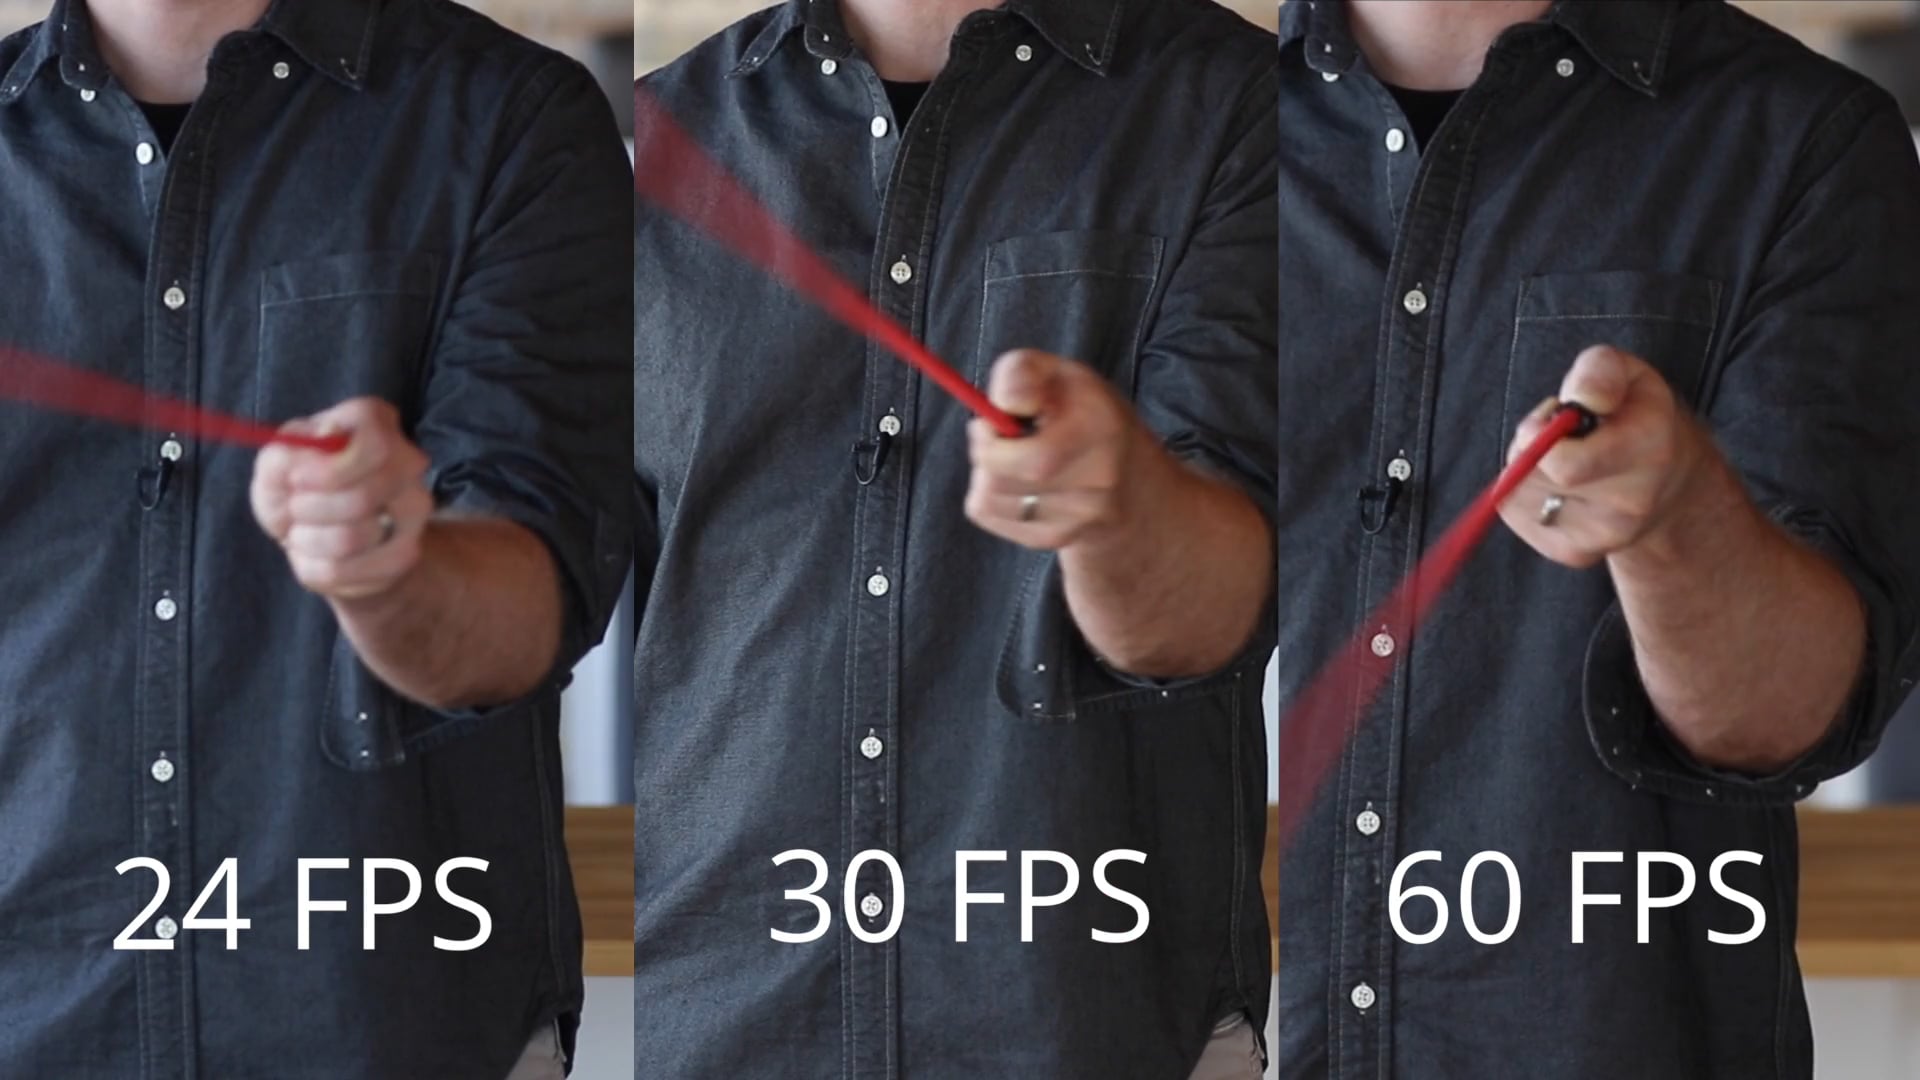 Three photos showing different variations: 24 FPS, 30 FPS, and 60 FPS